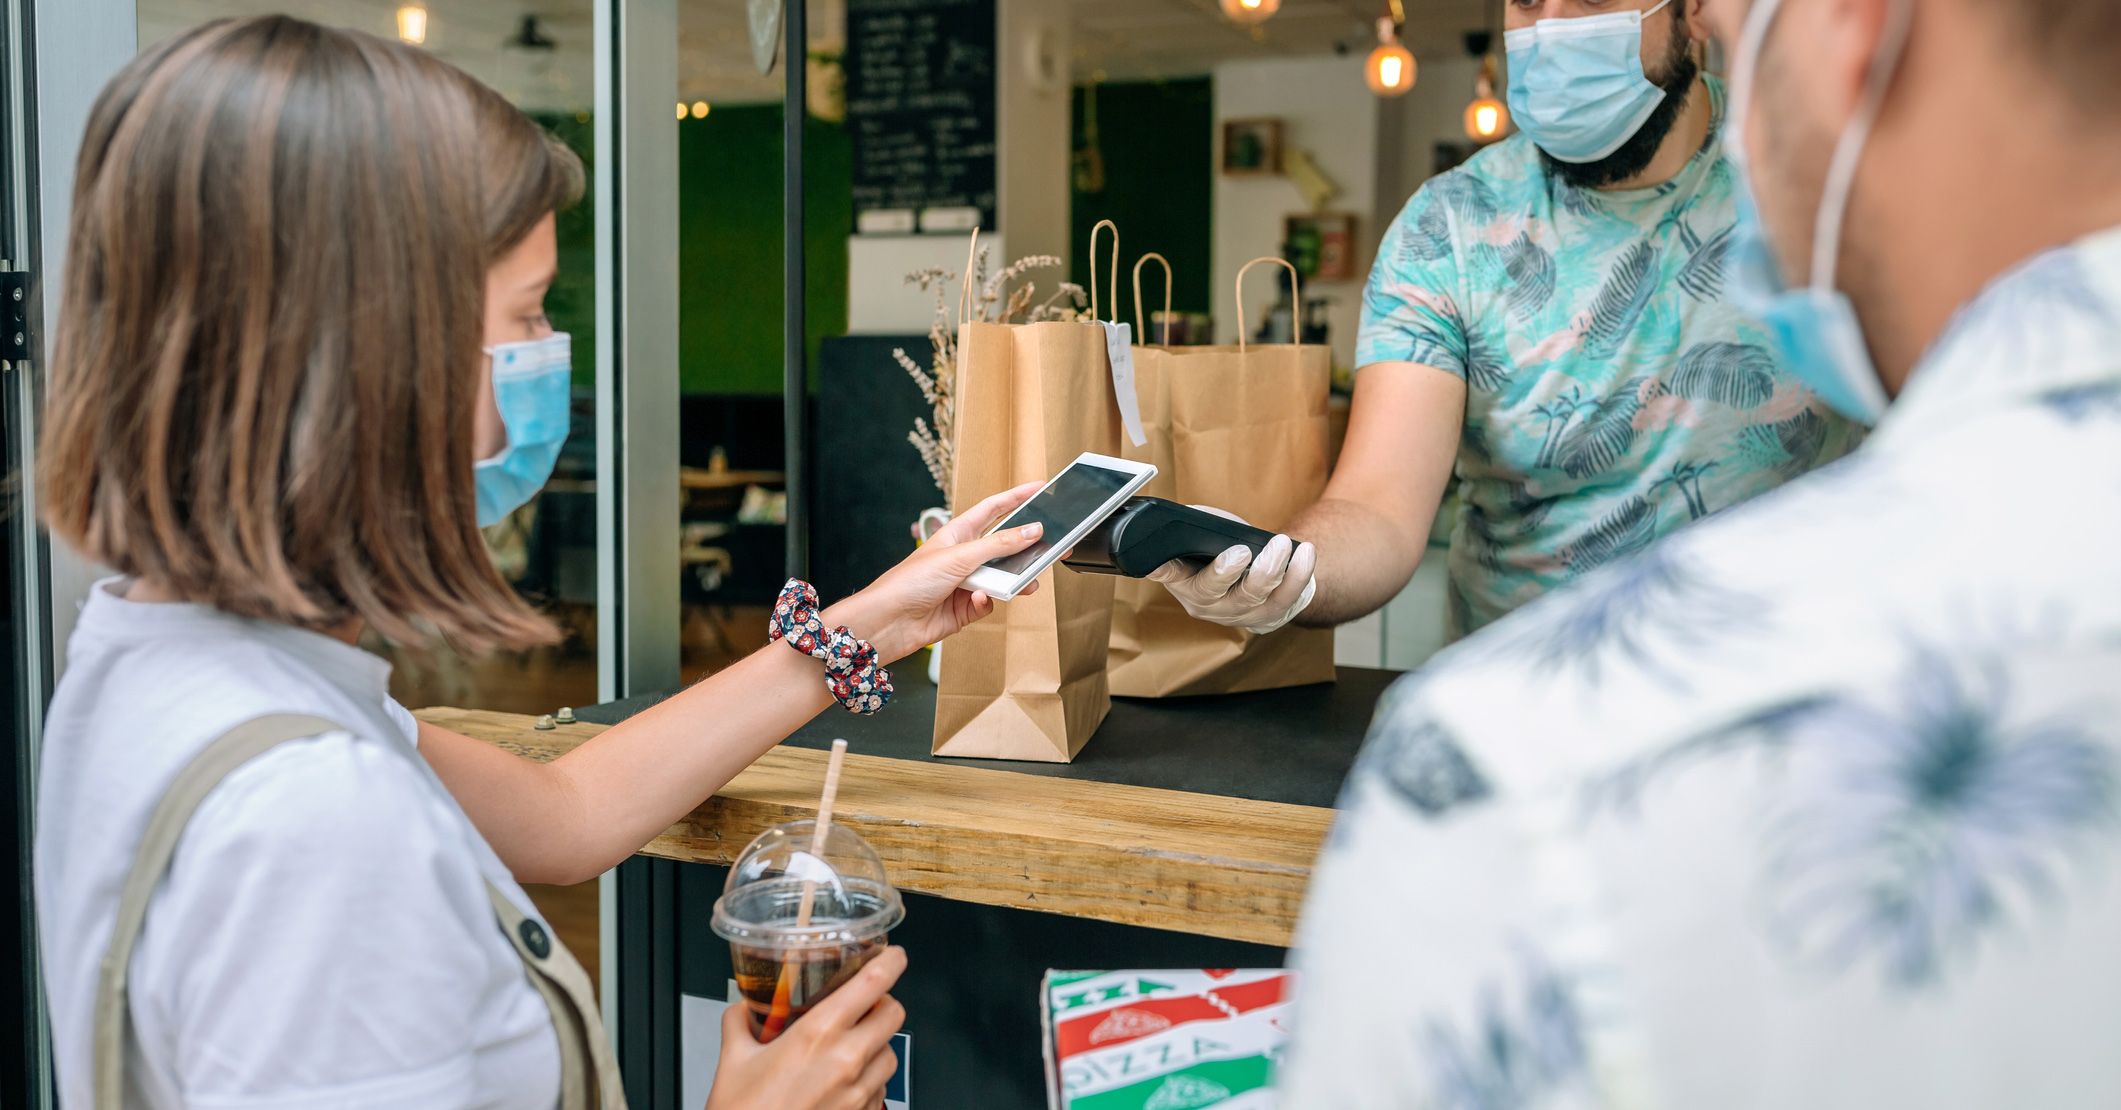 A woman wearing a mask holding a coffee paying for shopping using her phone